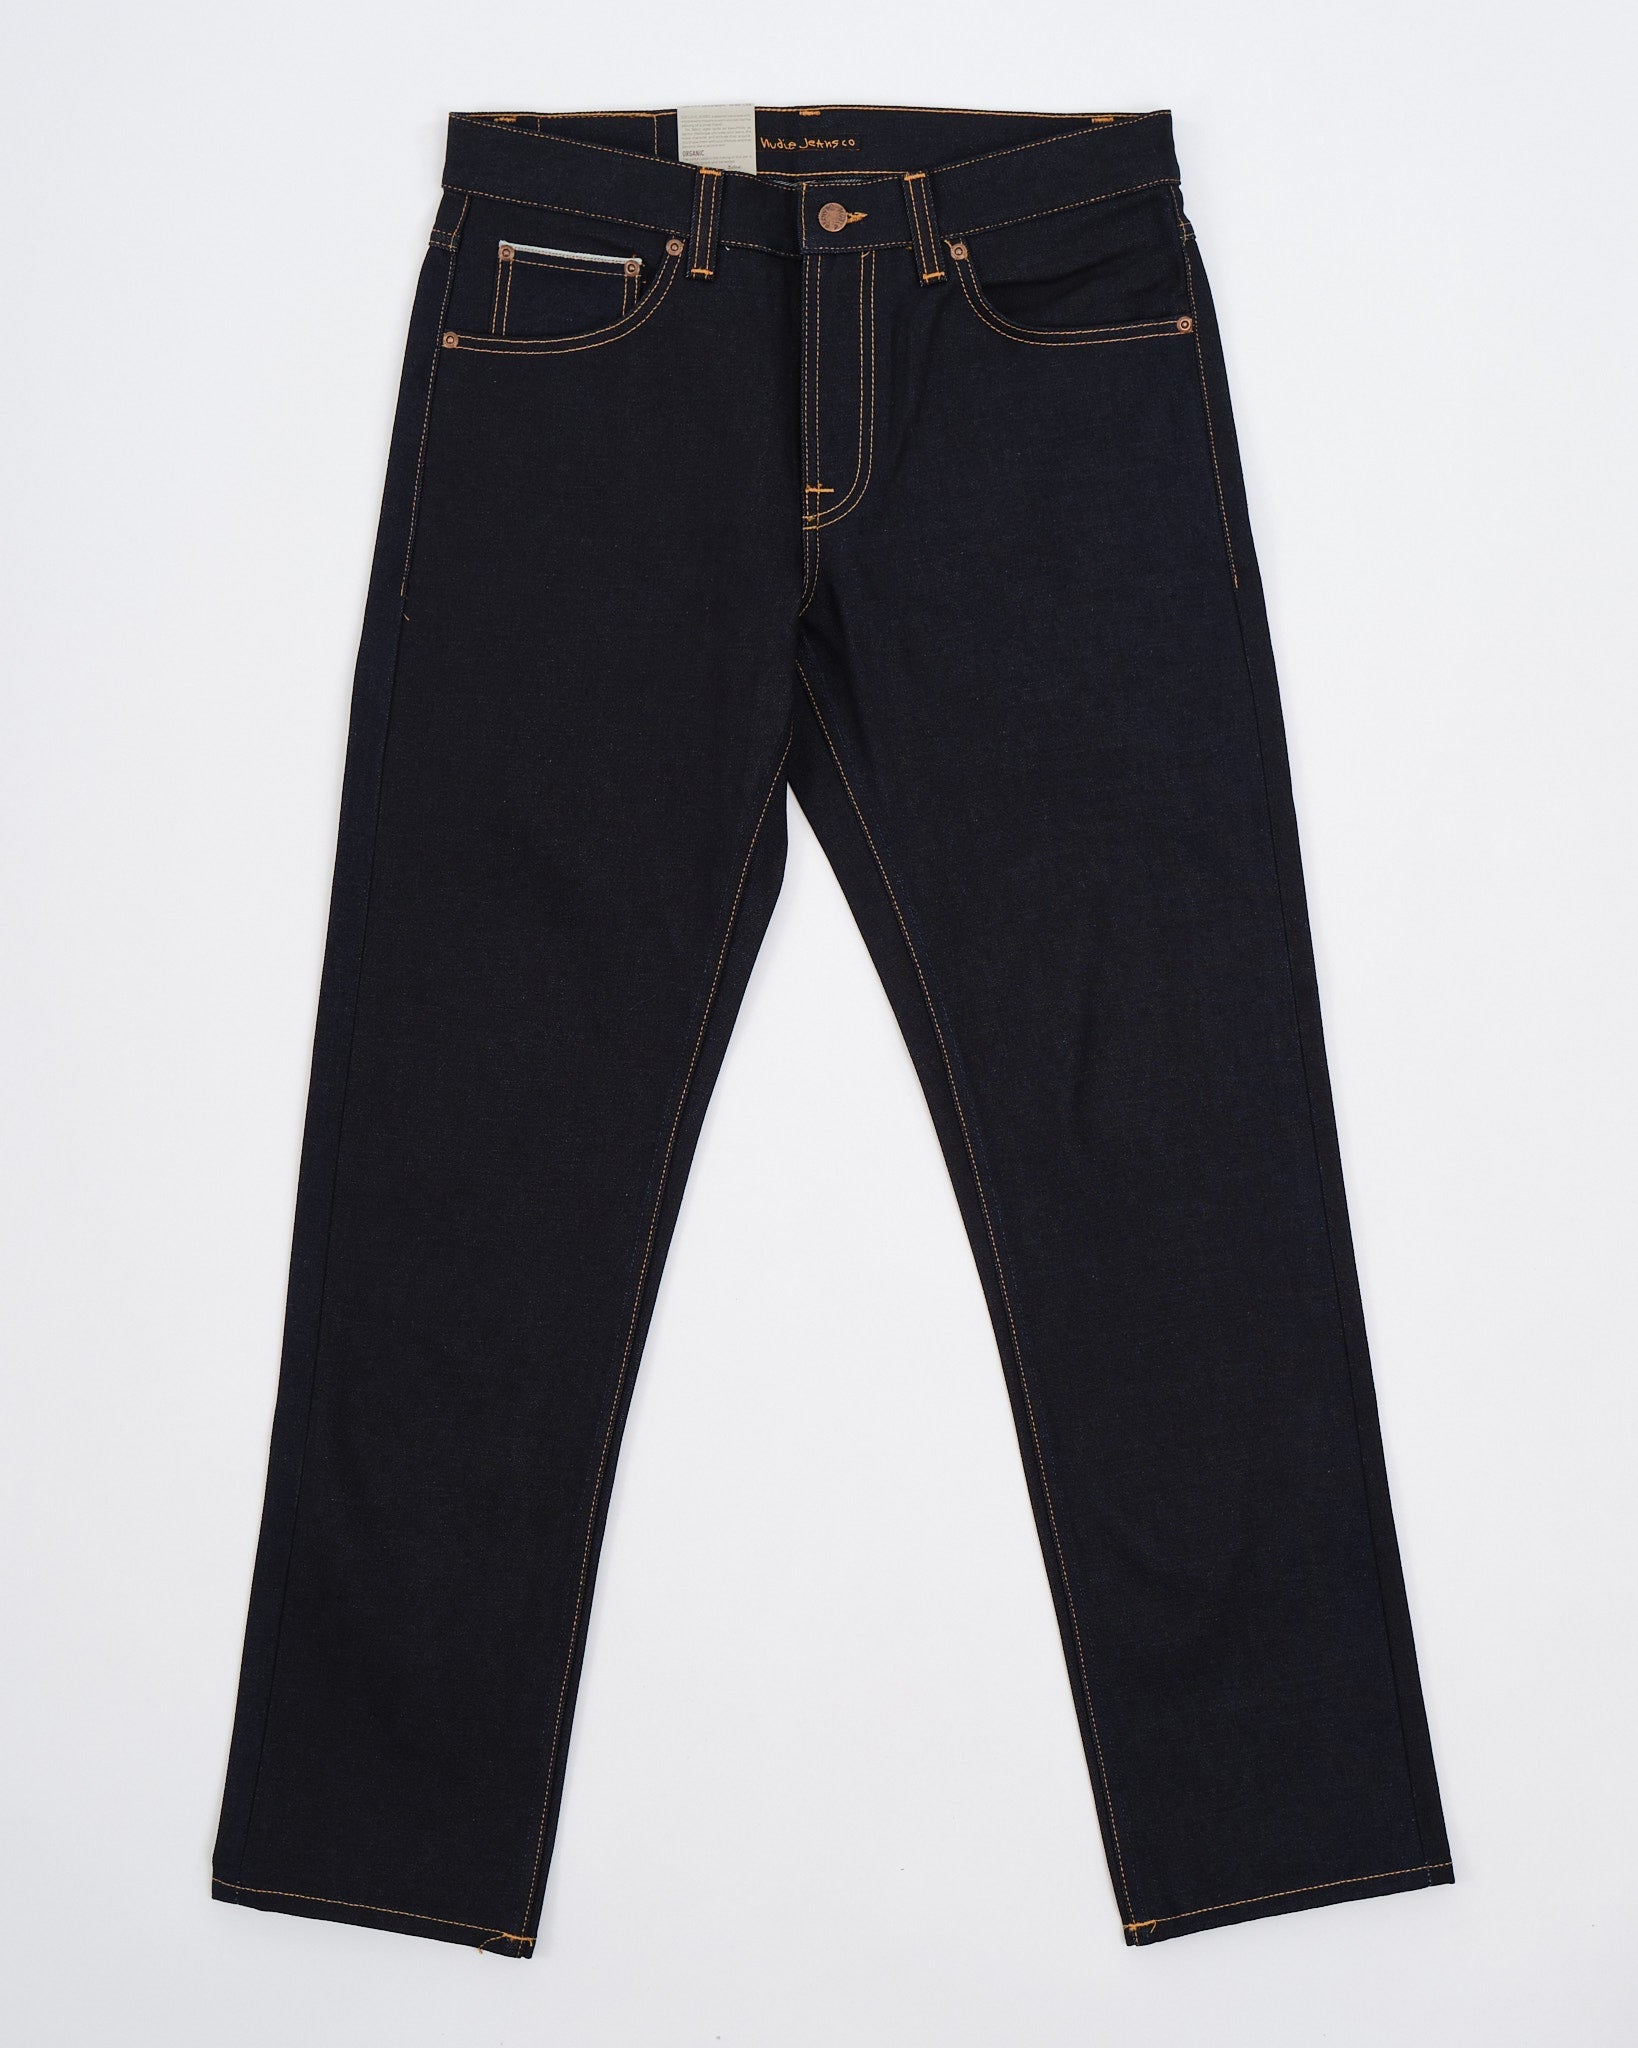 Gritty Jackson Dry Maze Selvage - Meadow